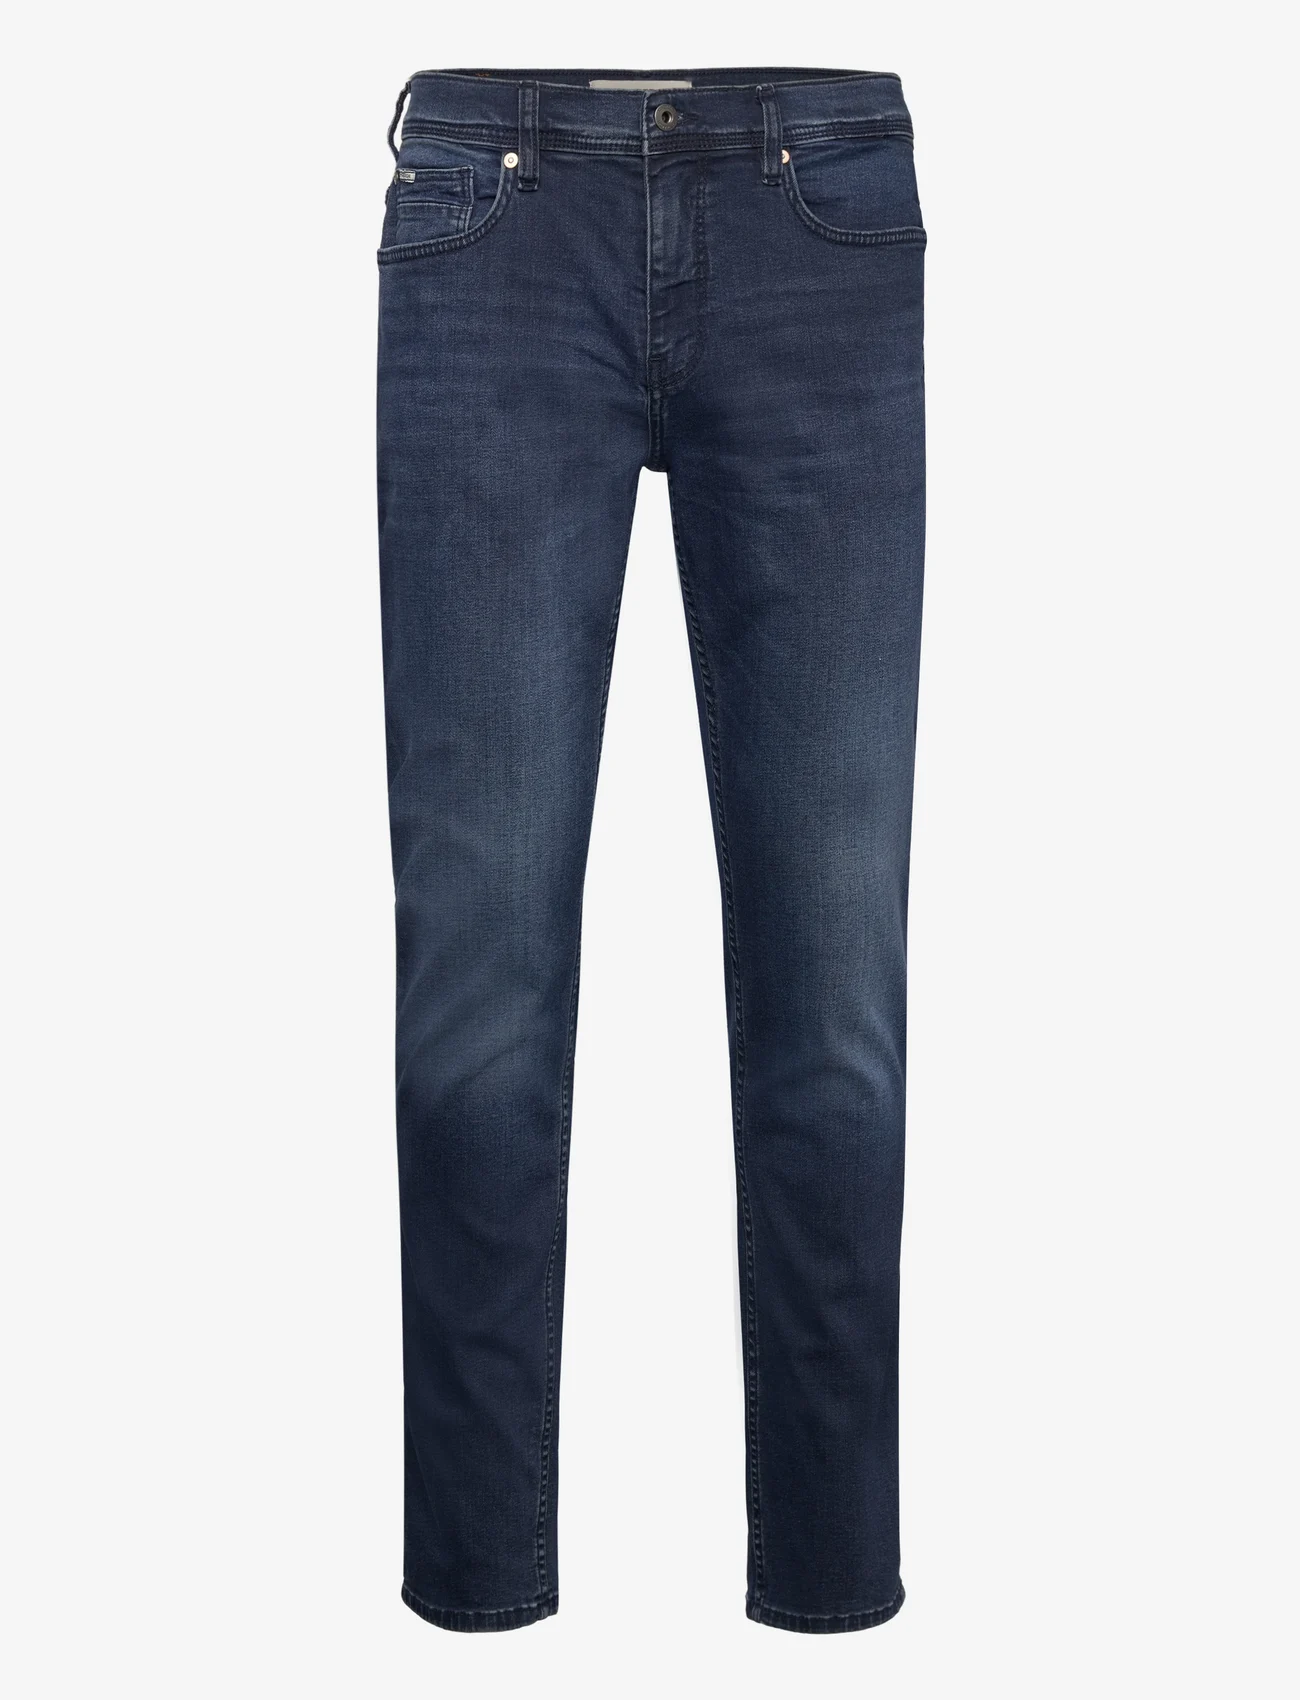 Lindbergh - Tapered Fit Superflex Jeans - nordic style - midnight navy - 1